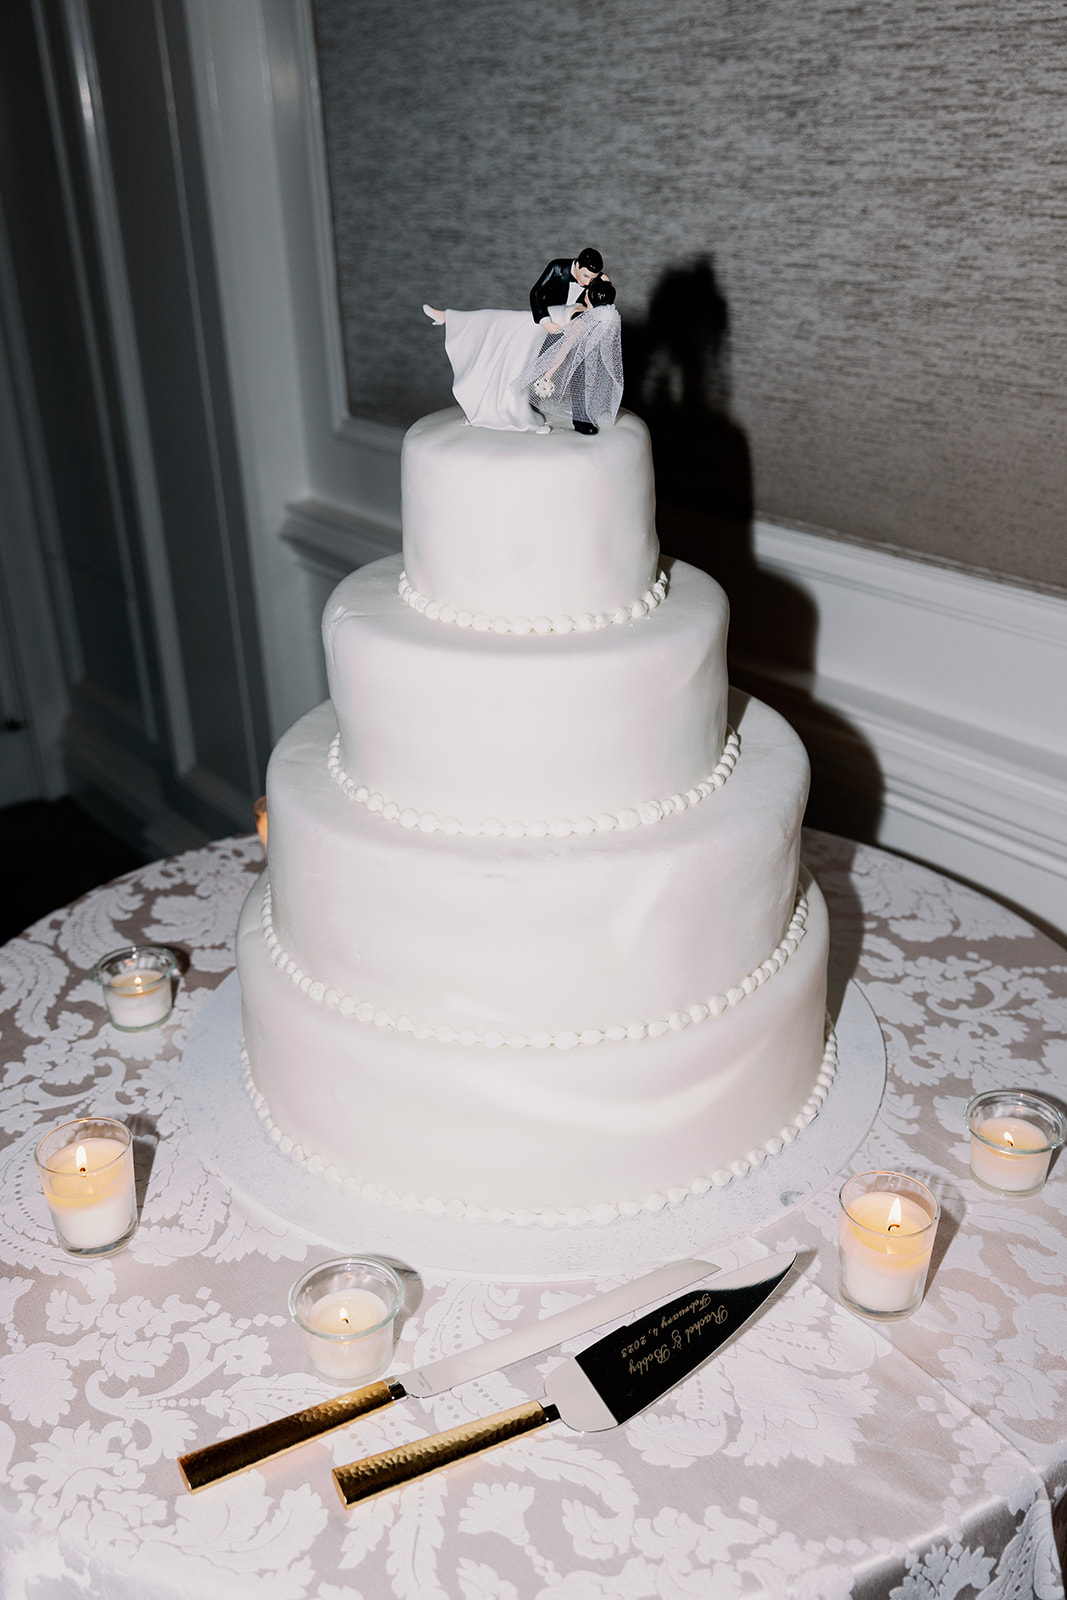 4-tier classic white wedding cake with bride and groom topper direct flash photo.